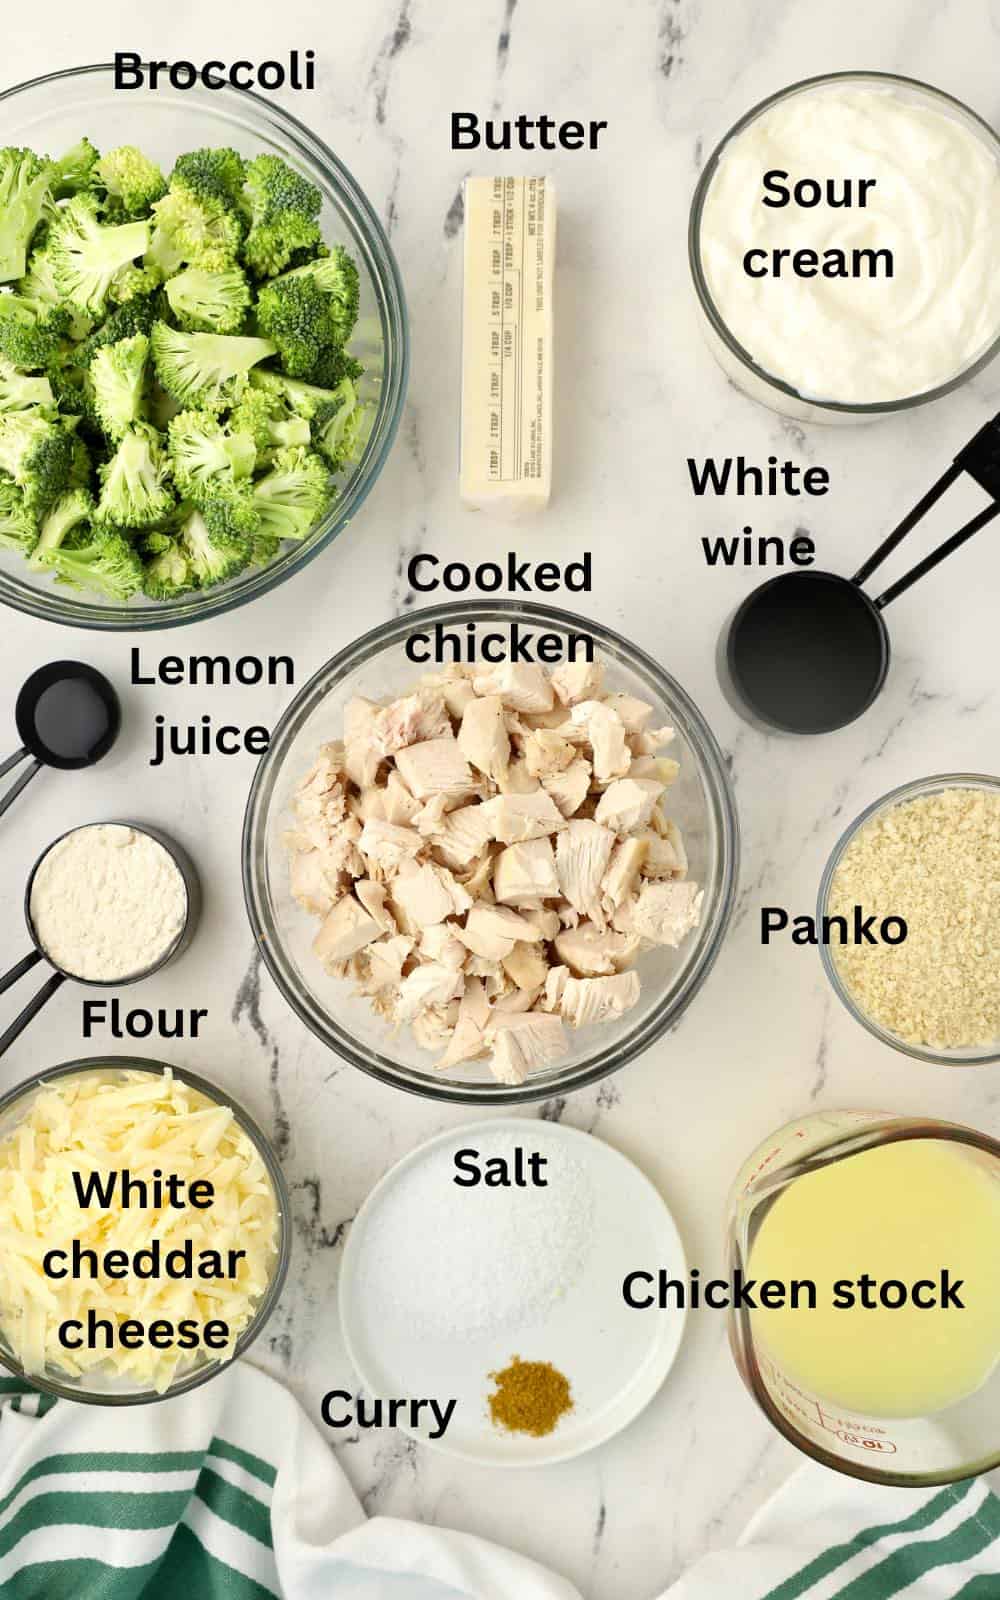 Ingredients for chicken divan including broccoli and sour cream.